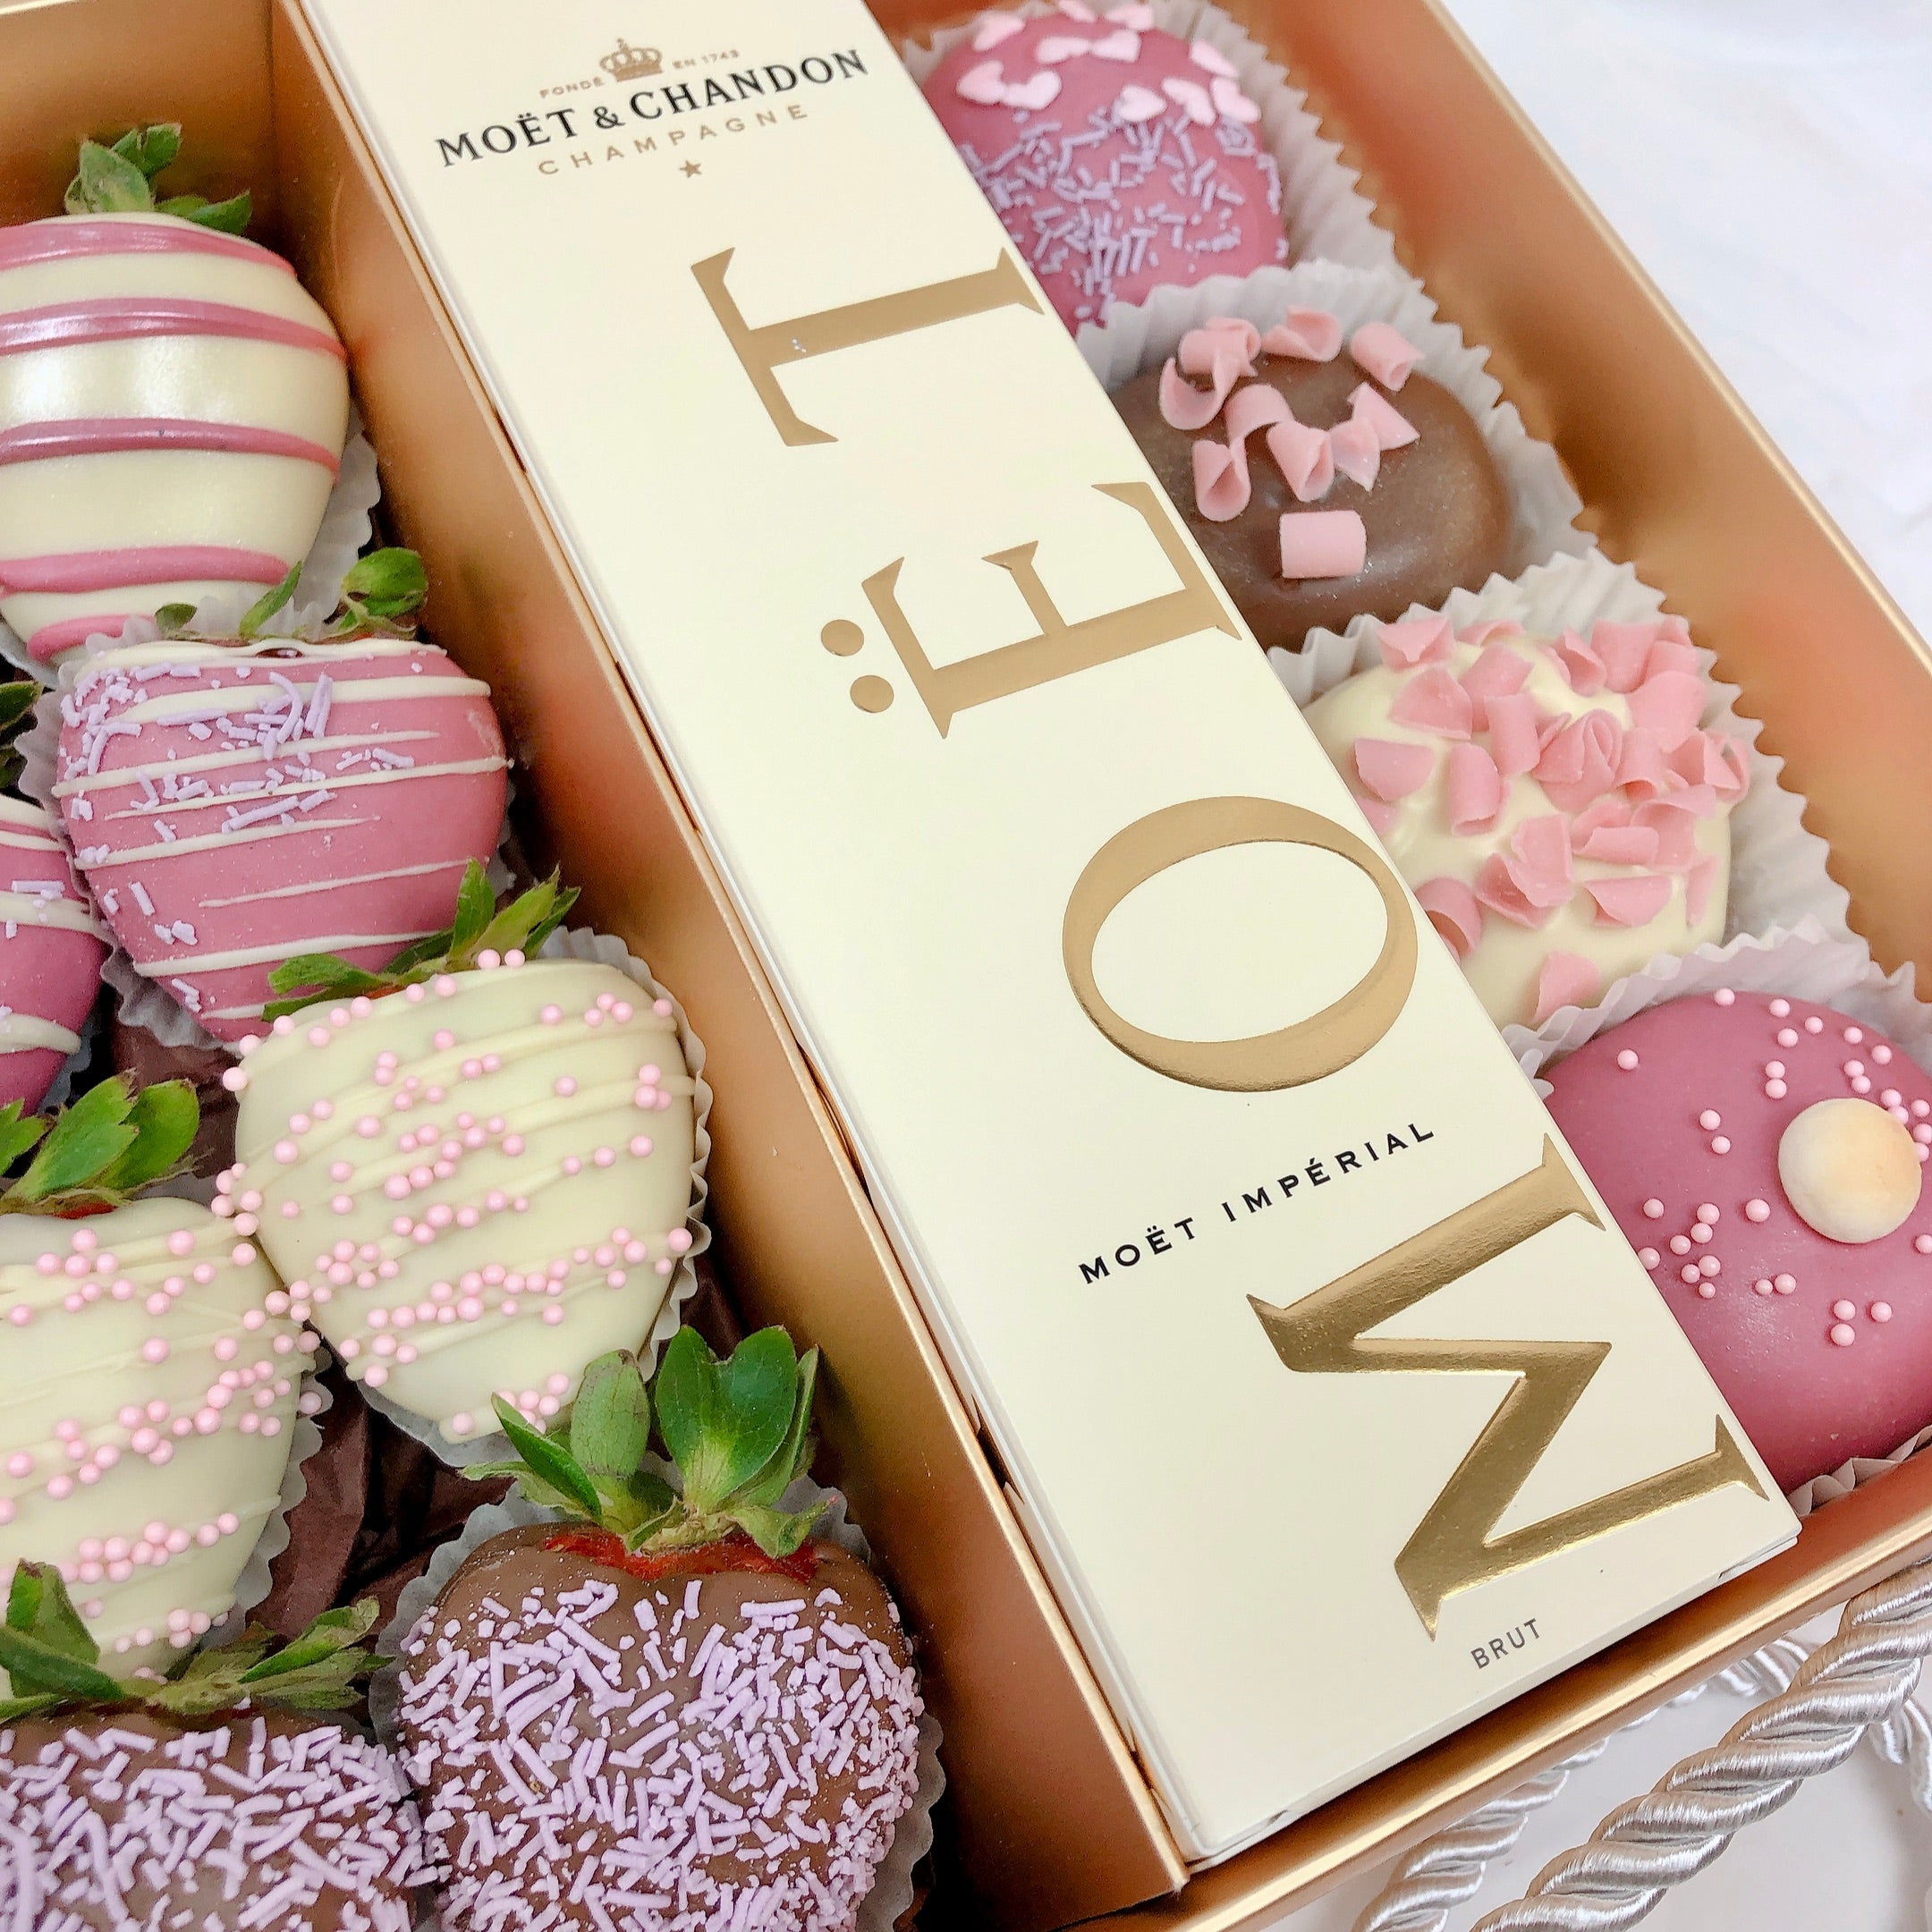 Feminine dessert box chocolate and champagne gift hamper, chocolate covered strawberries with champagne in a gift hamper same day delivery